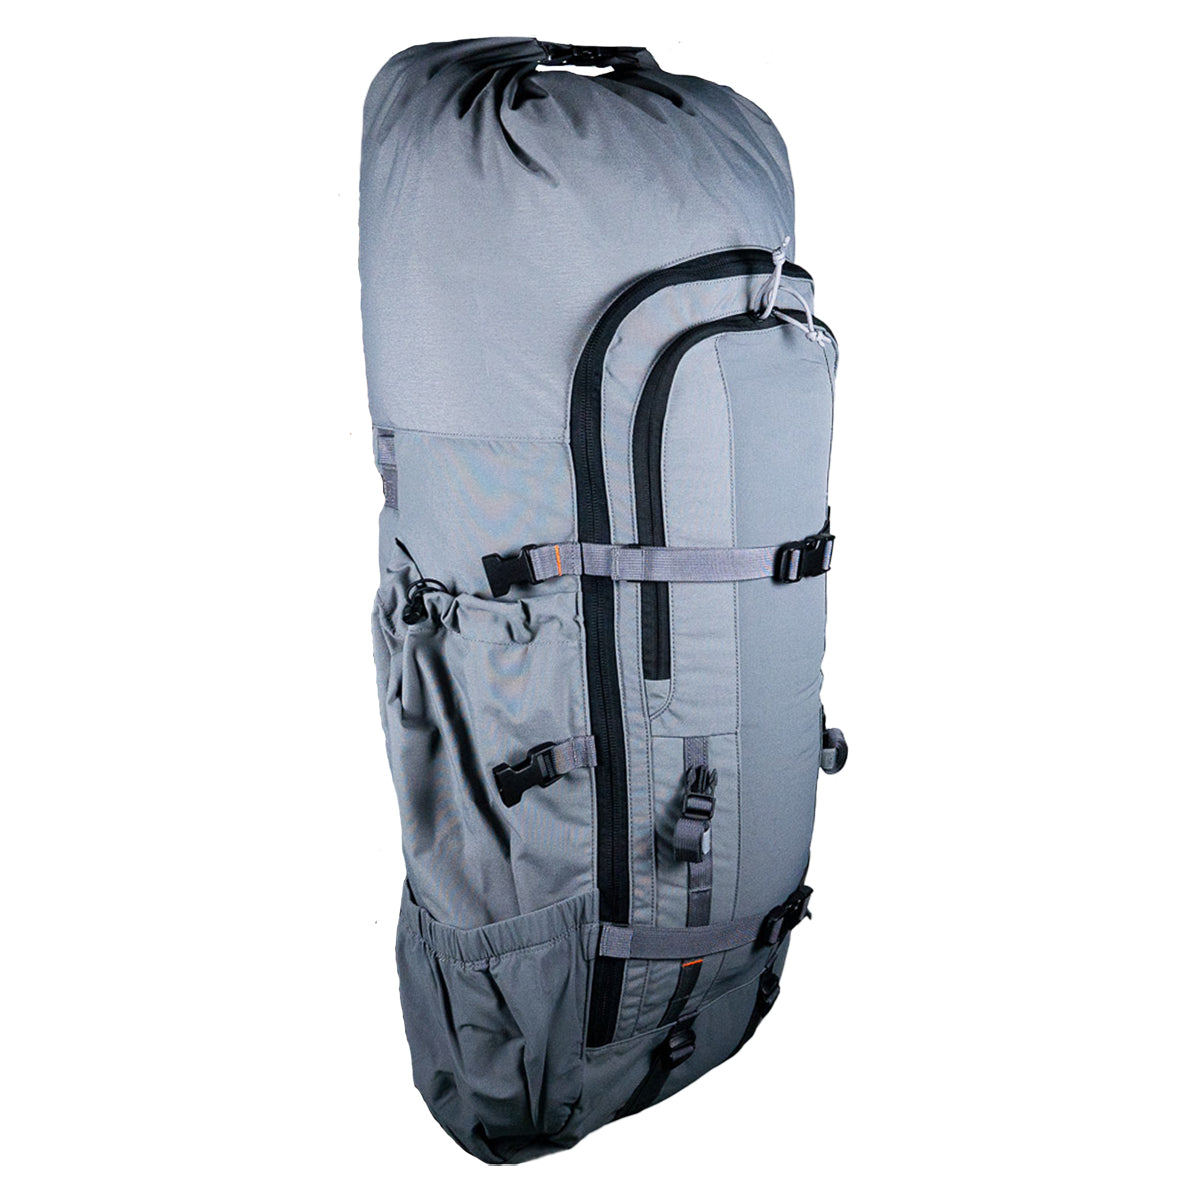 Initial Ascent 8K Bag Only